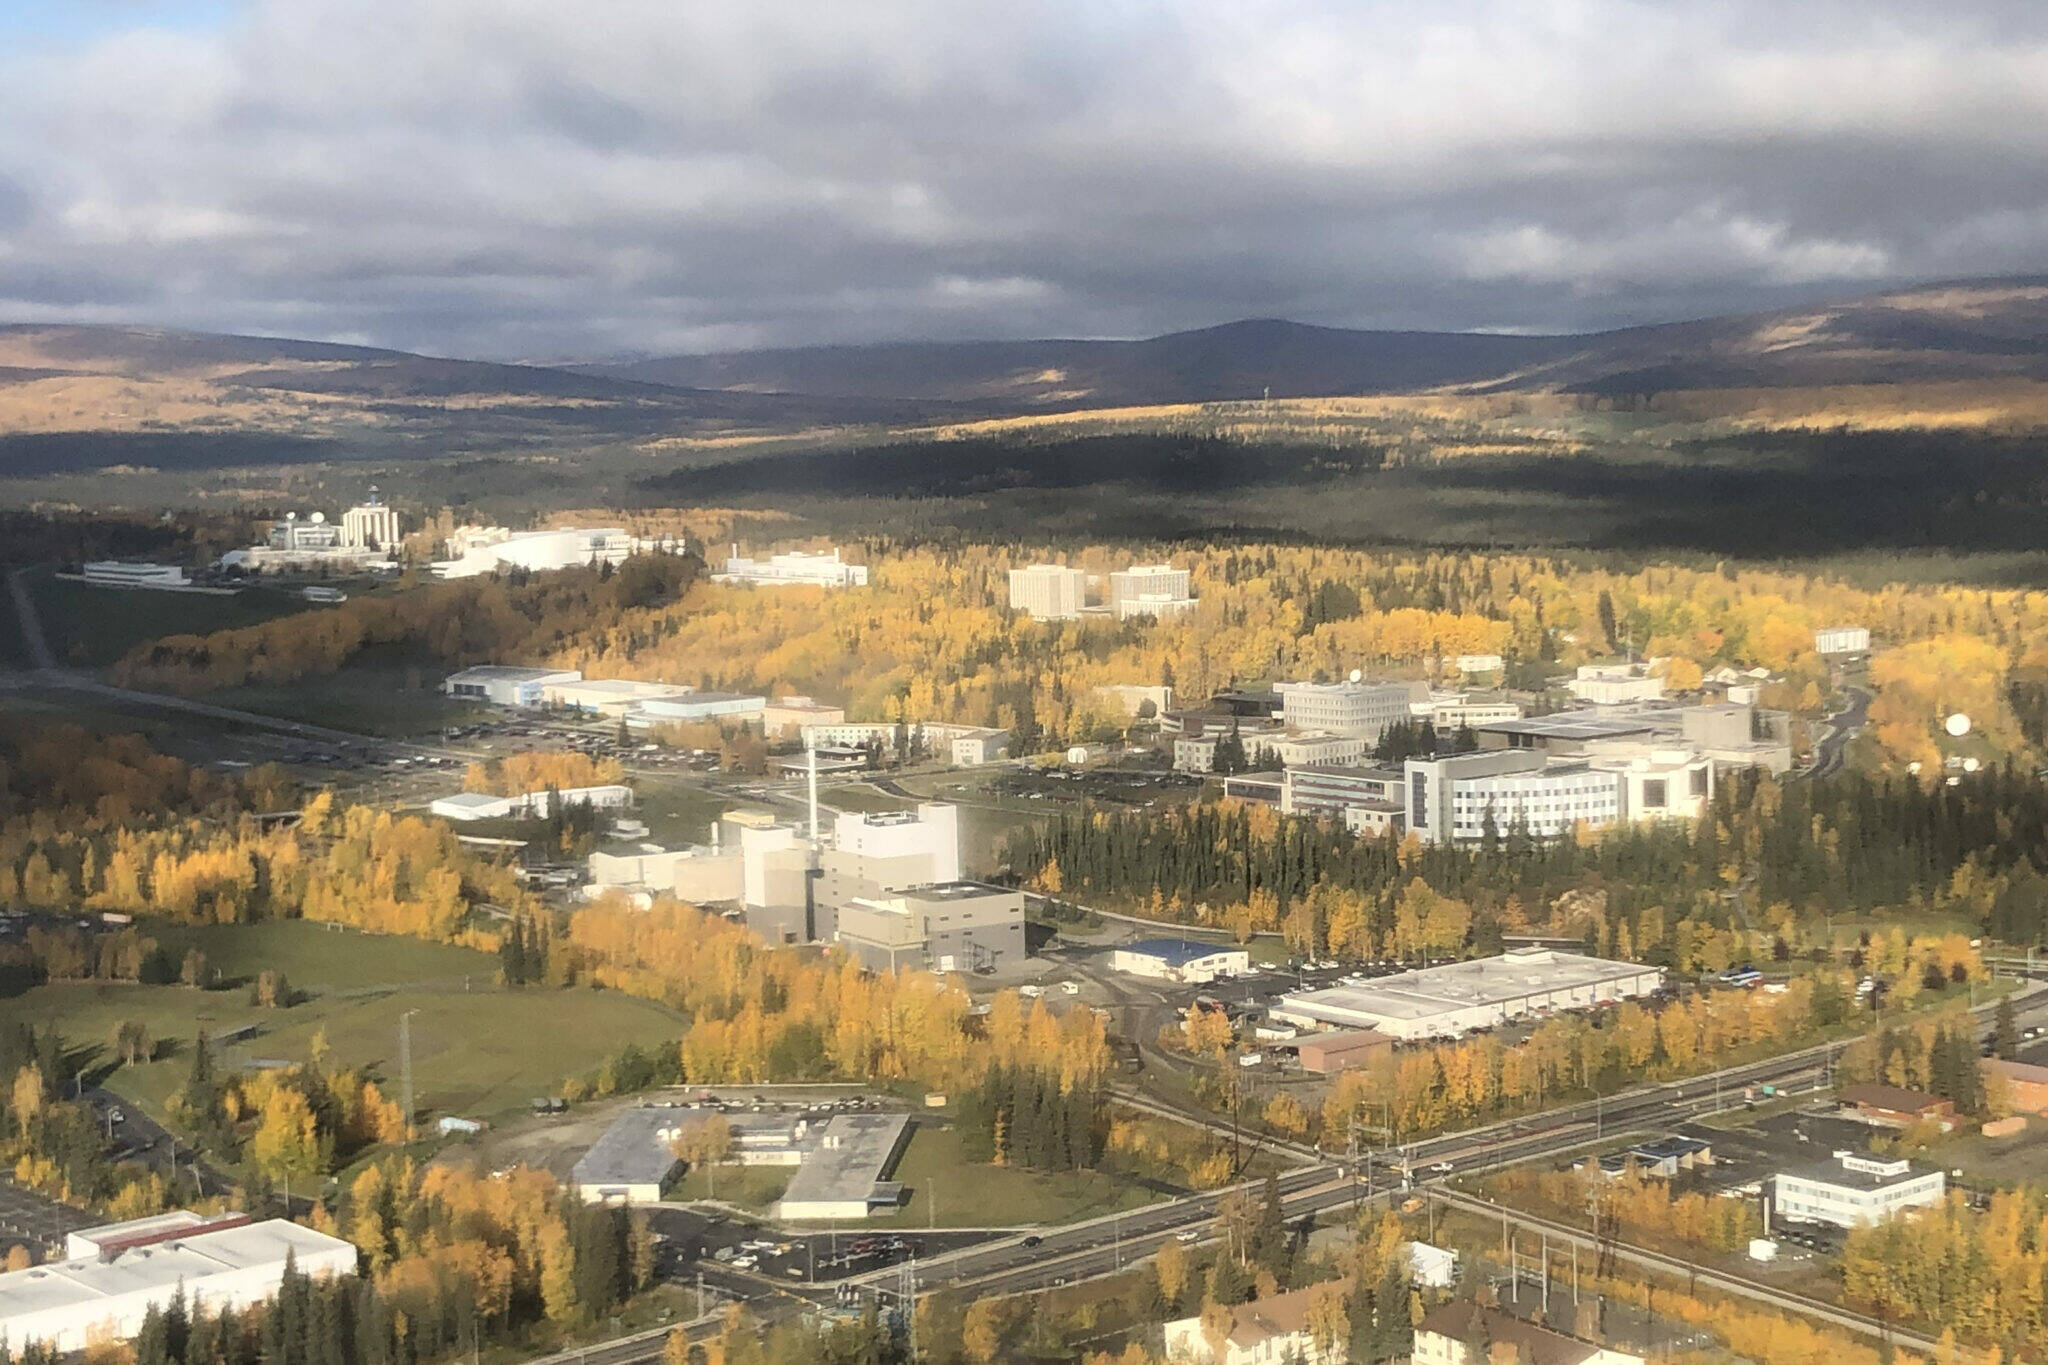 The campus of the University of Alaska Fairbanks is seen from the air on Sept. 20, 2022. (Photo by James Brooks/Alaska Beacon)